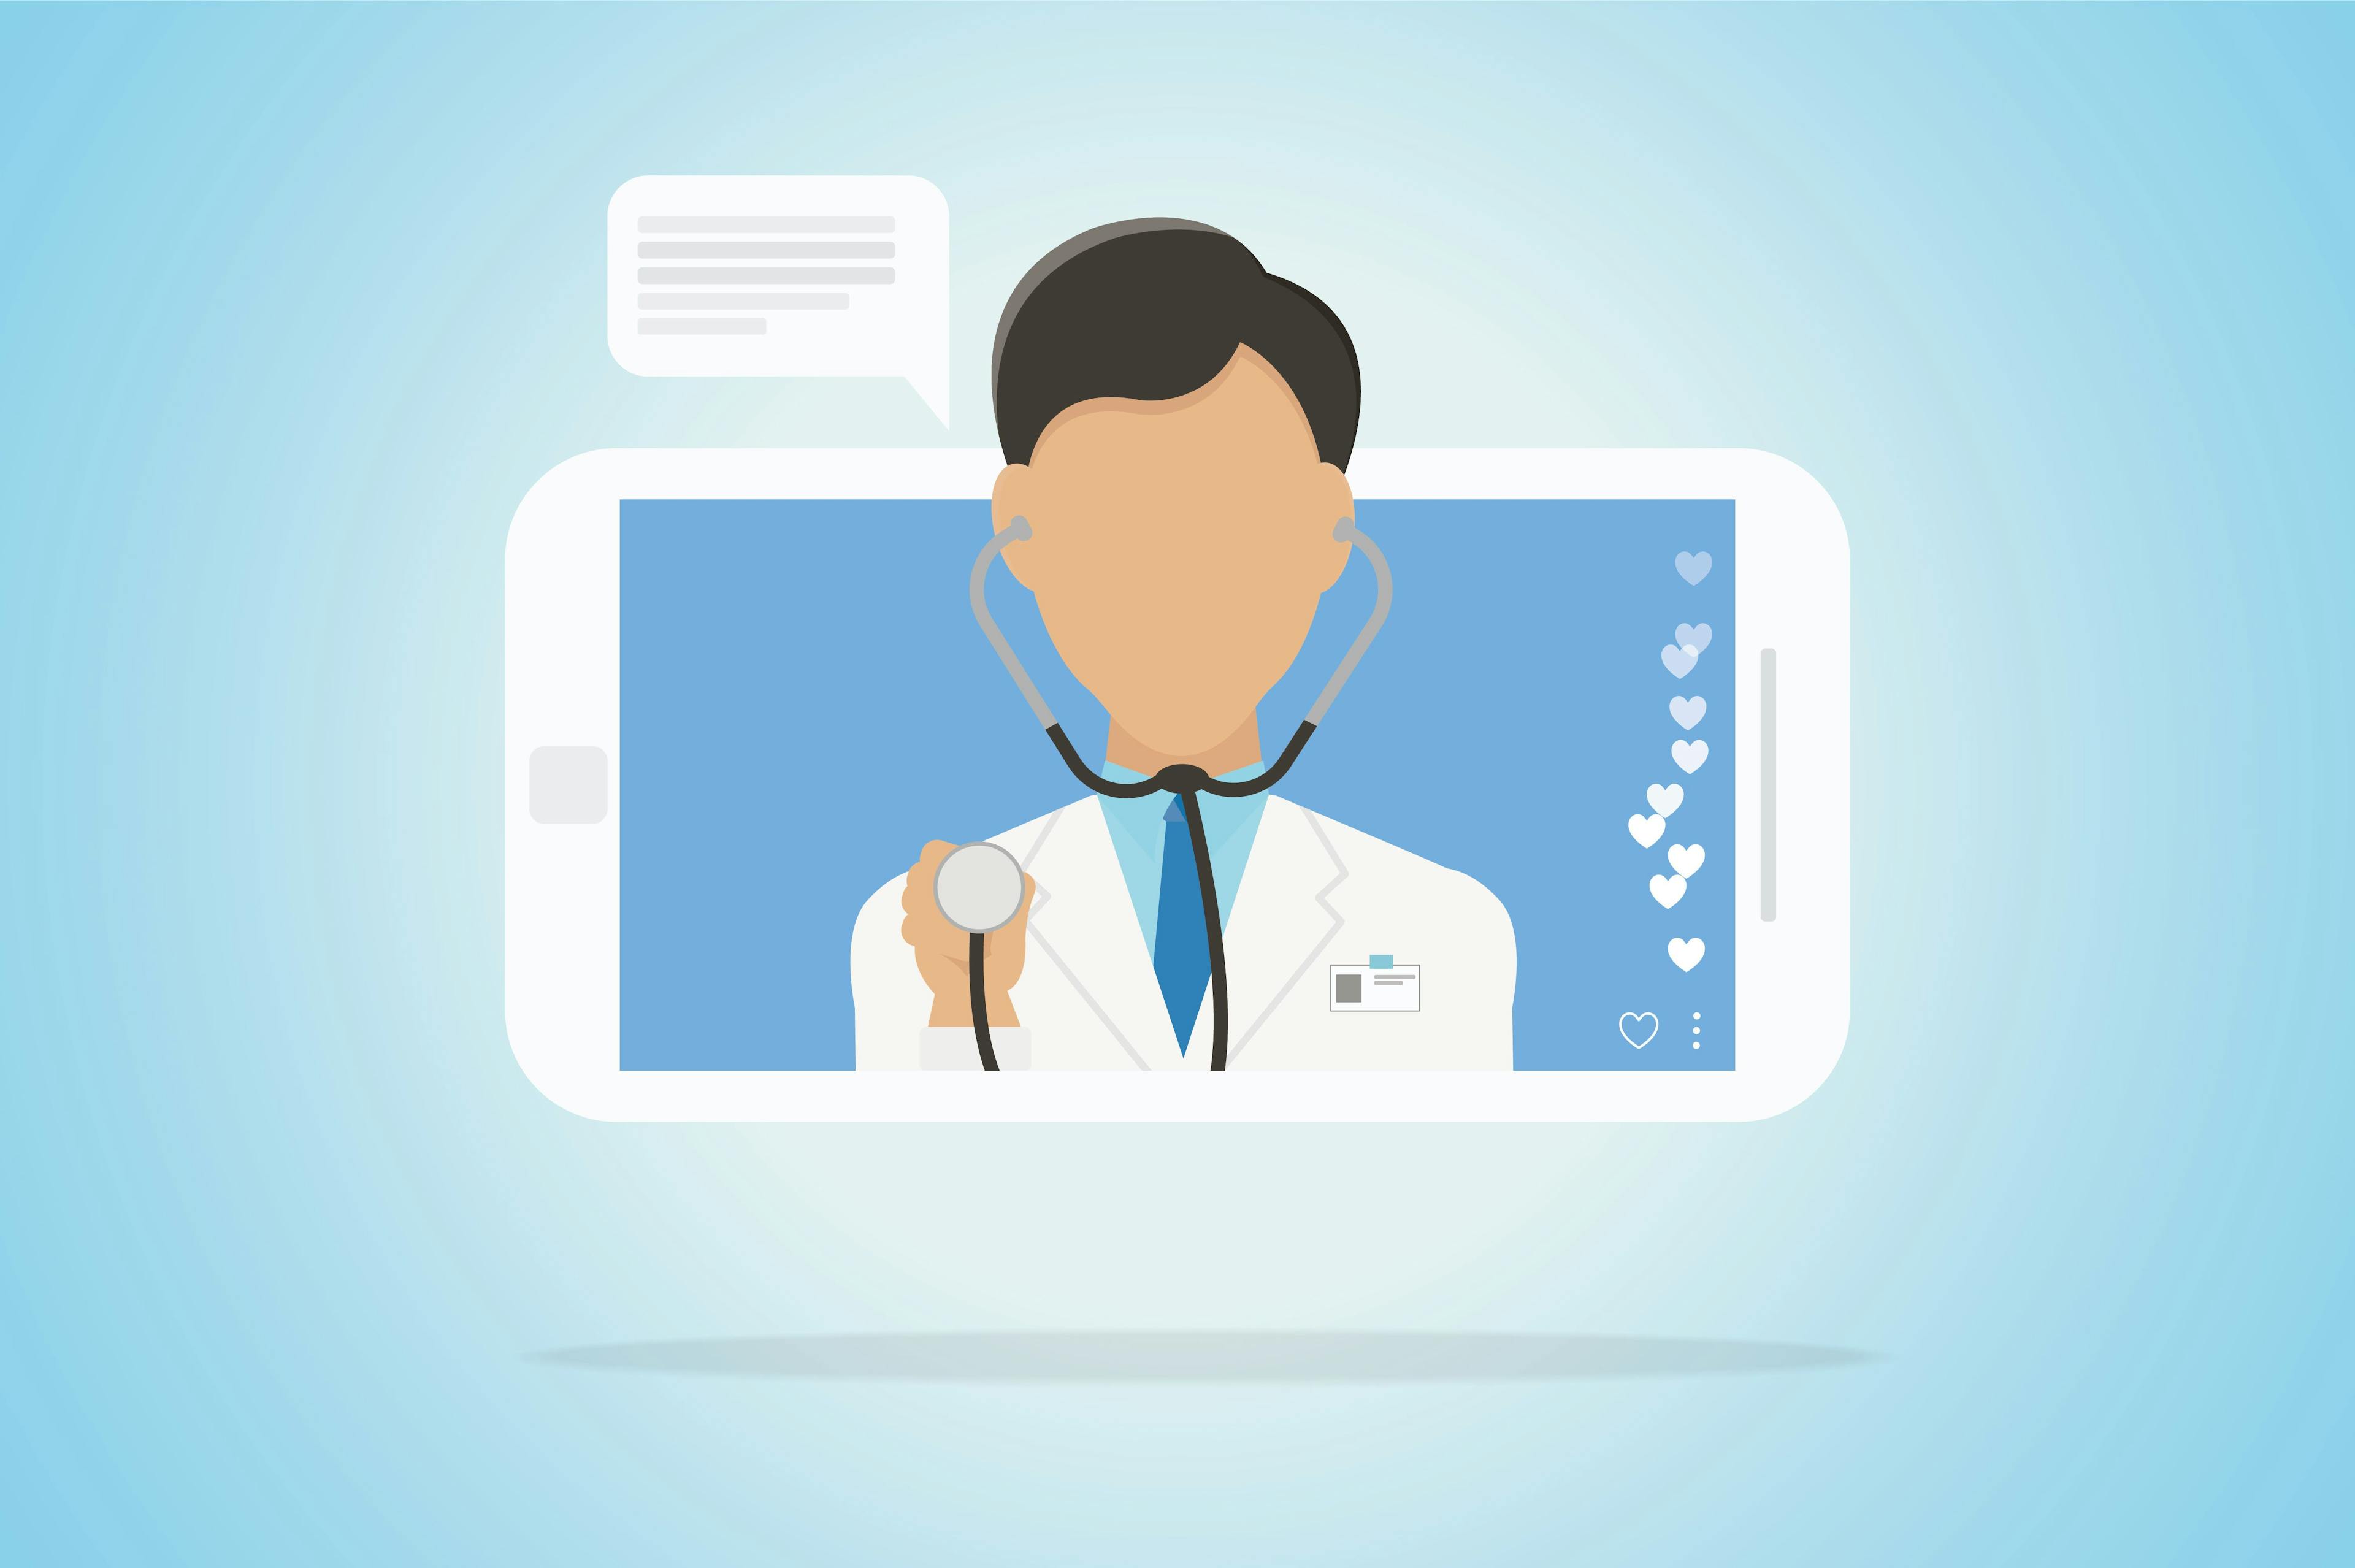 Telehealth: Policy suggestions going forward